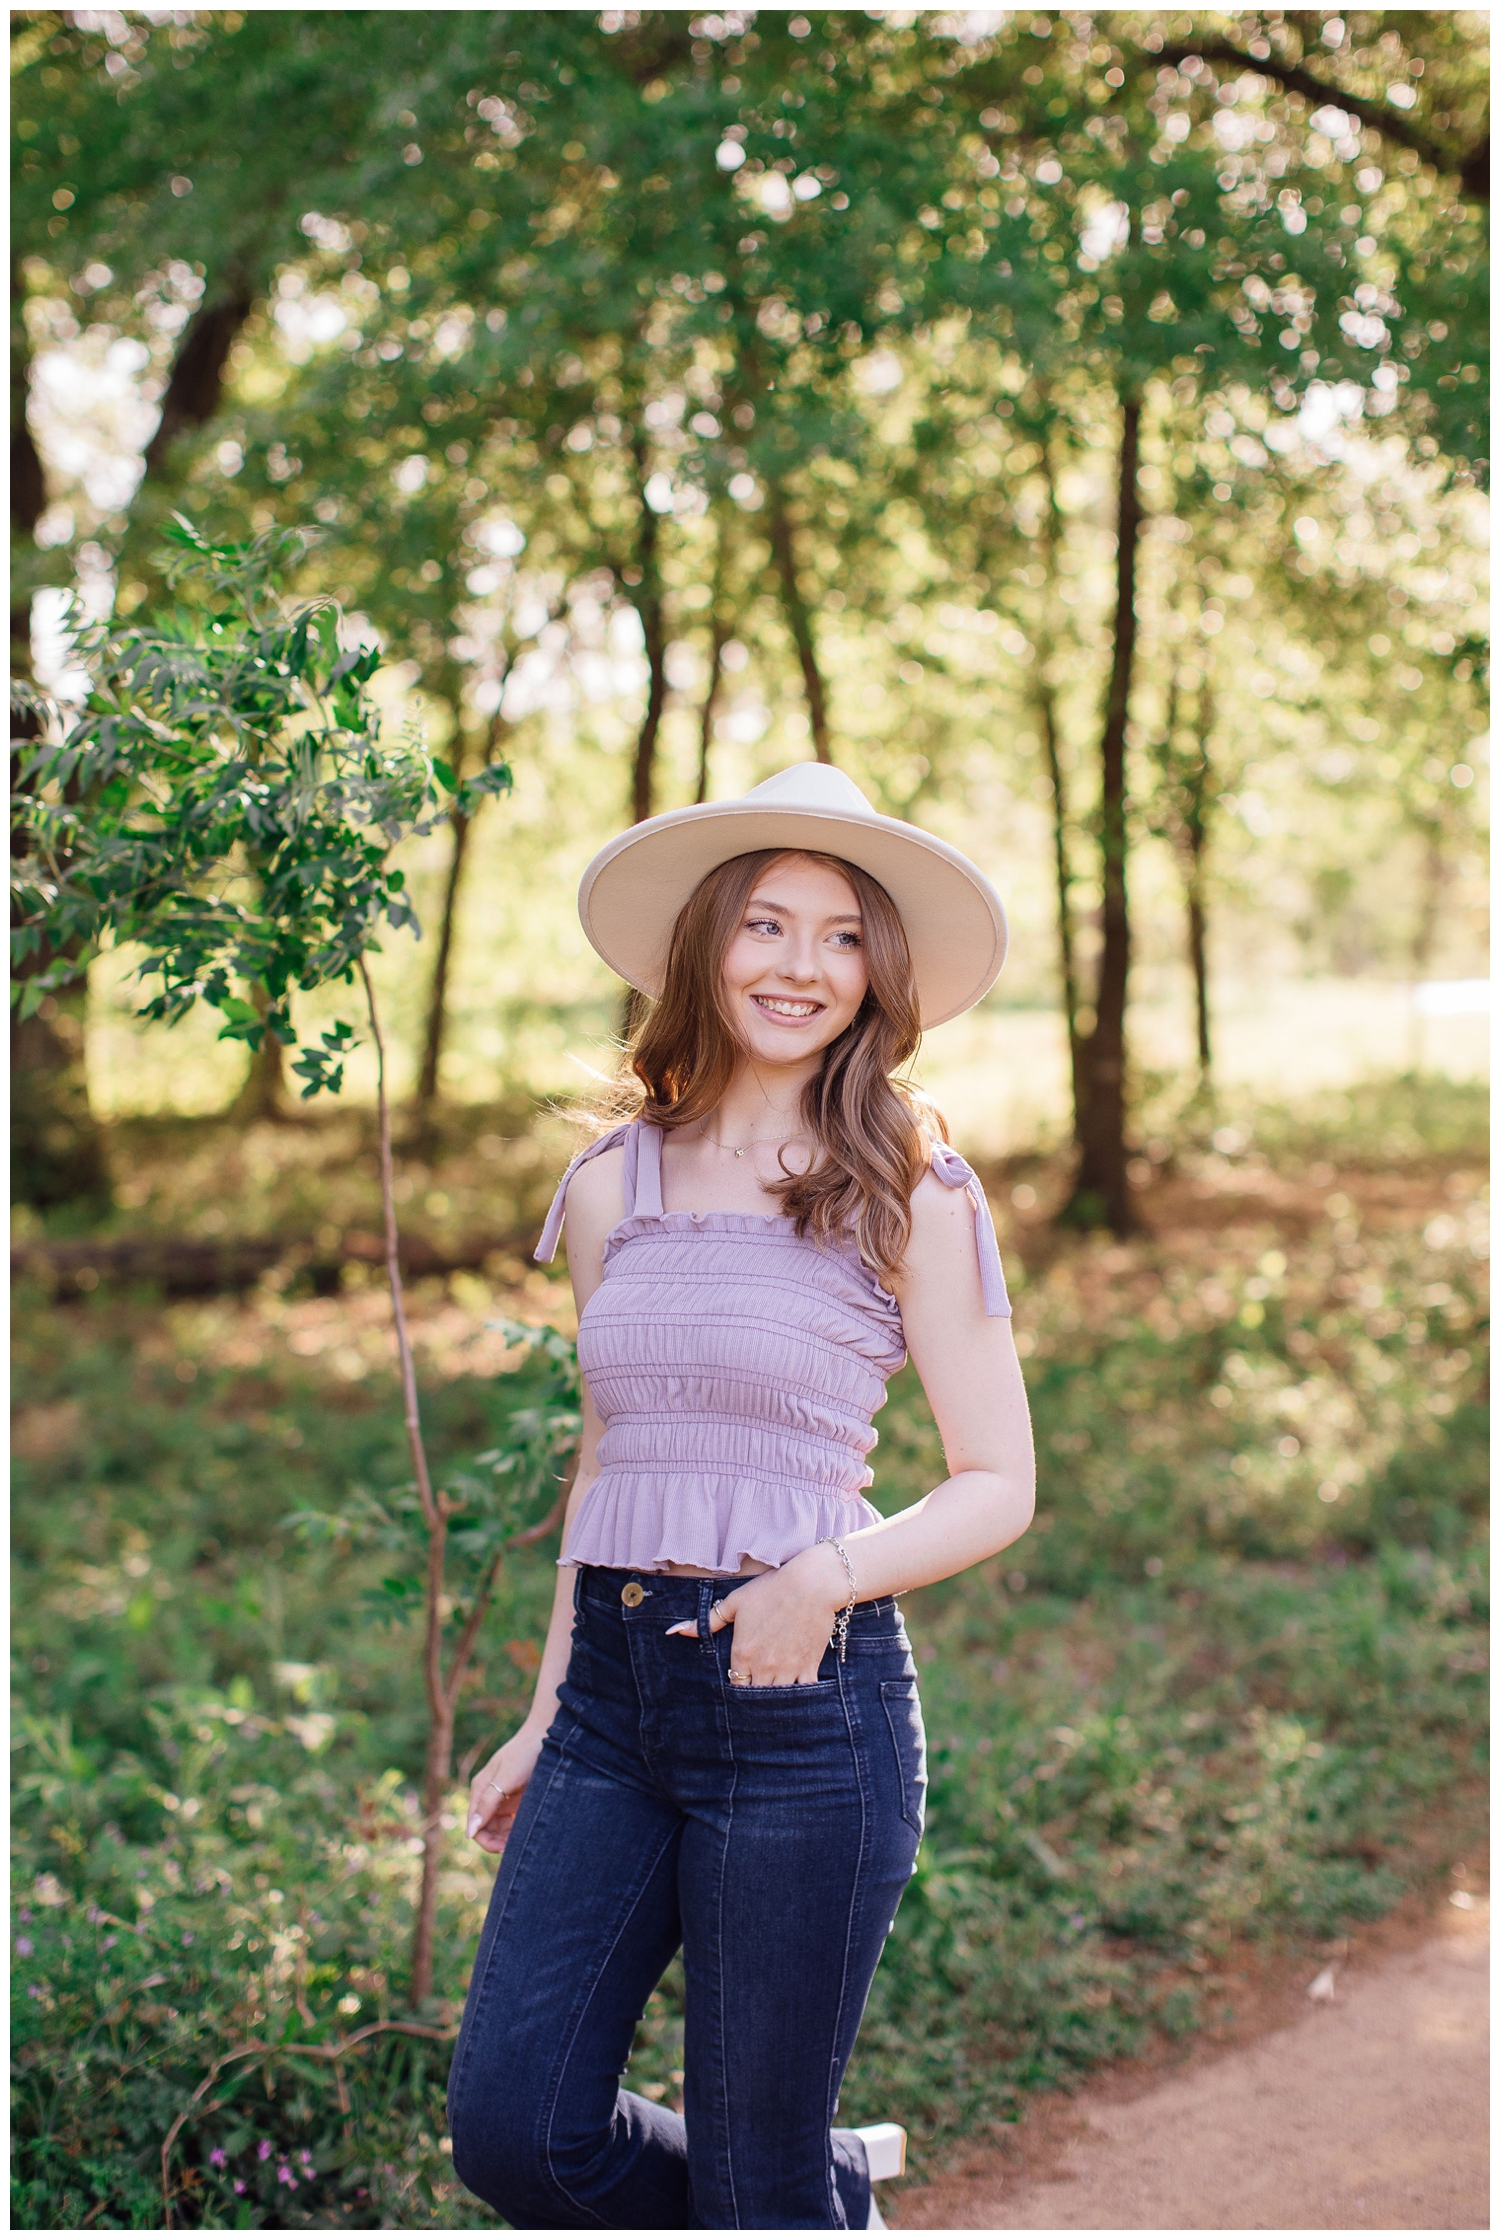 senior girl with hand in denim pocket wearing white brimmed hat outdoors in a field